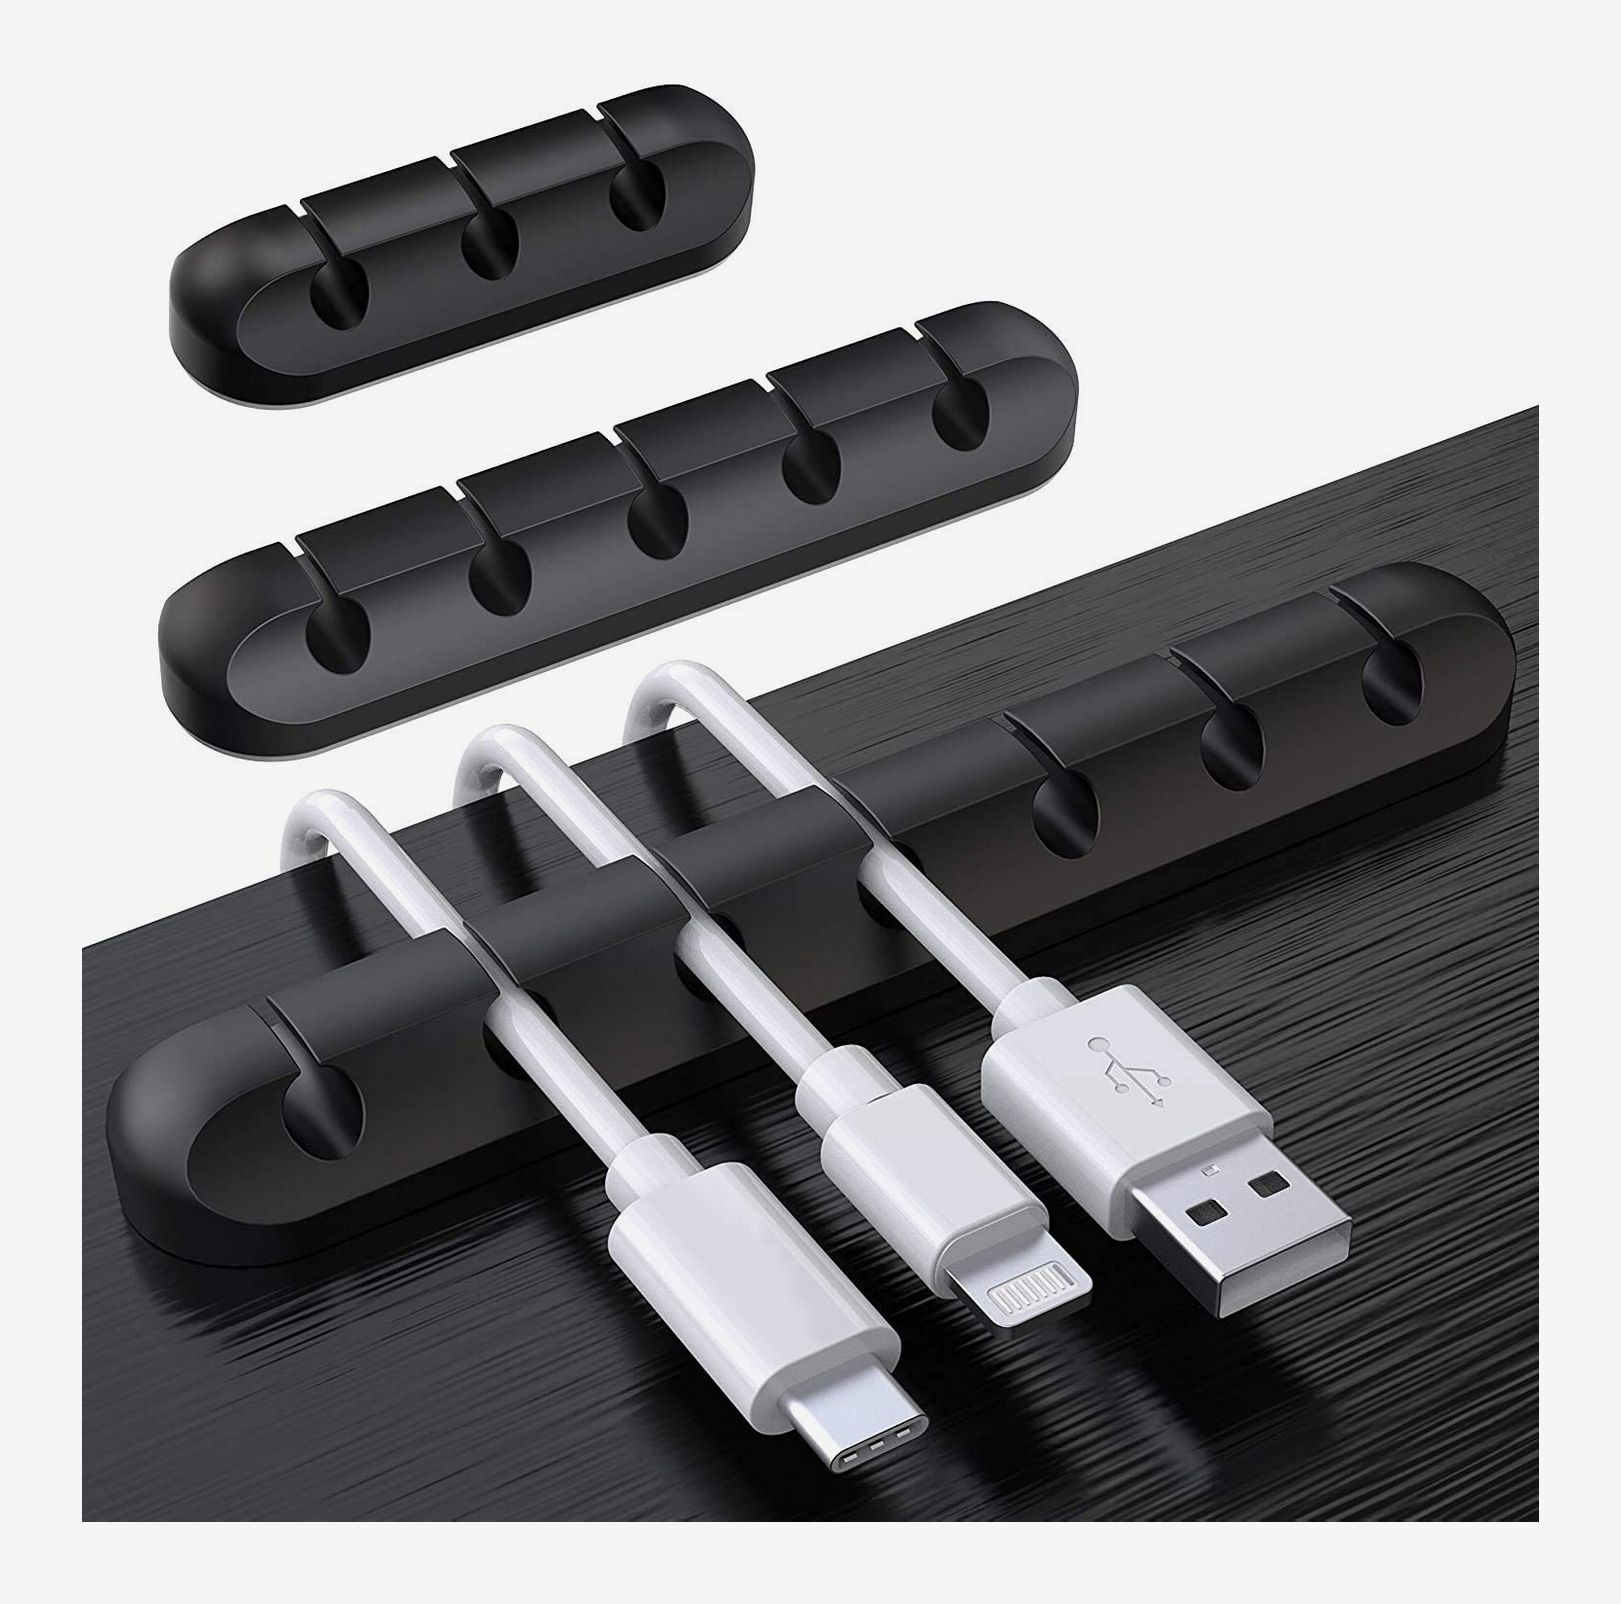 Ideal Cords Management for Organizing Cable Wires-Home OHill 24 Pack Black Adhesive Cord Holders Cable Clips Desk & Nightstand Office Car